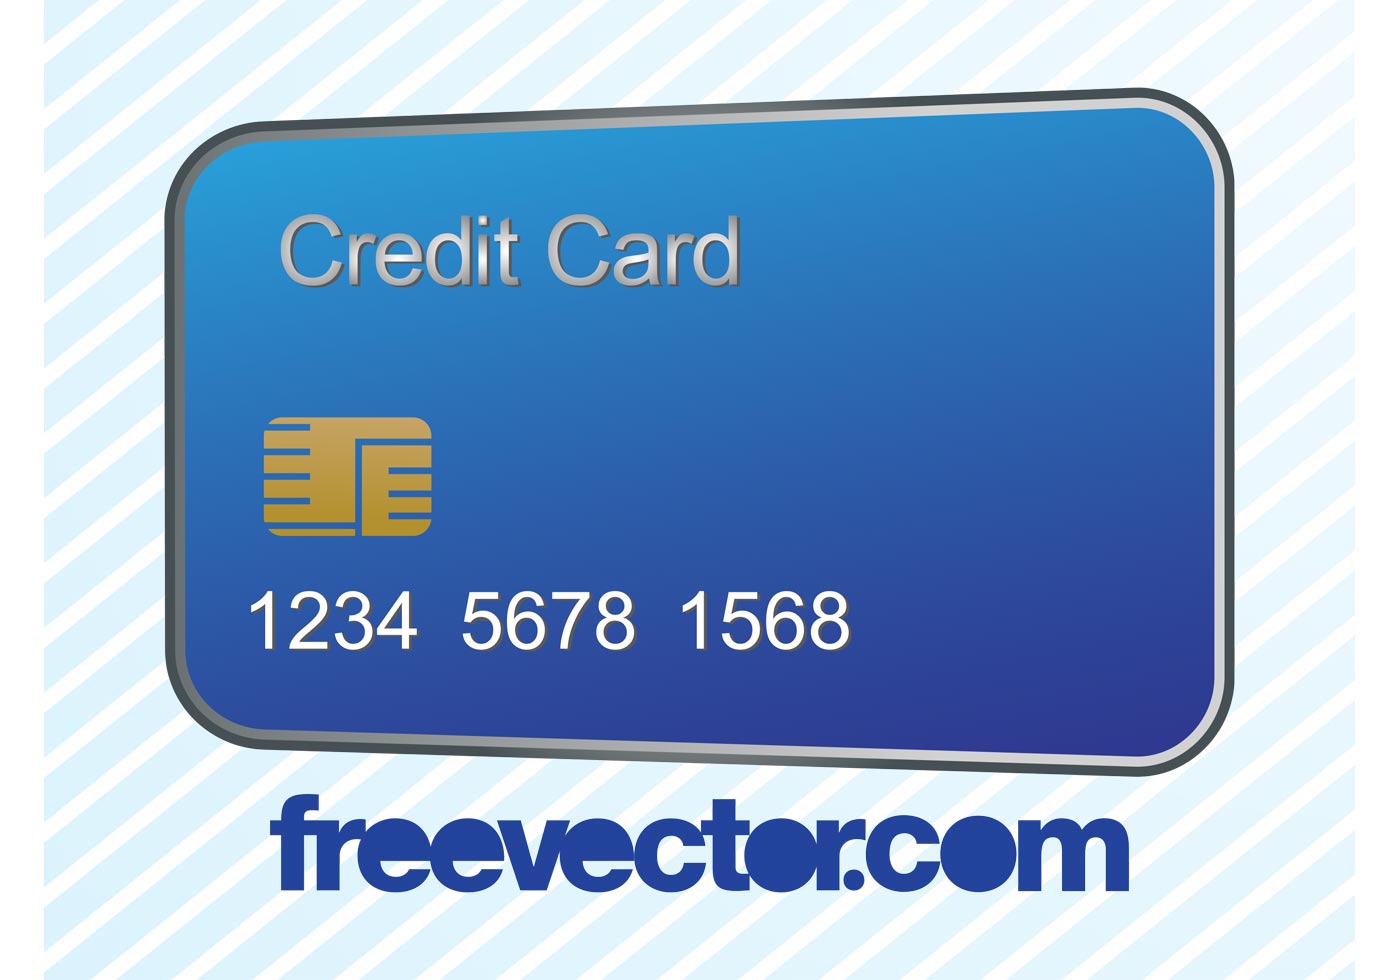 credit card images free download